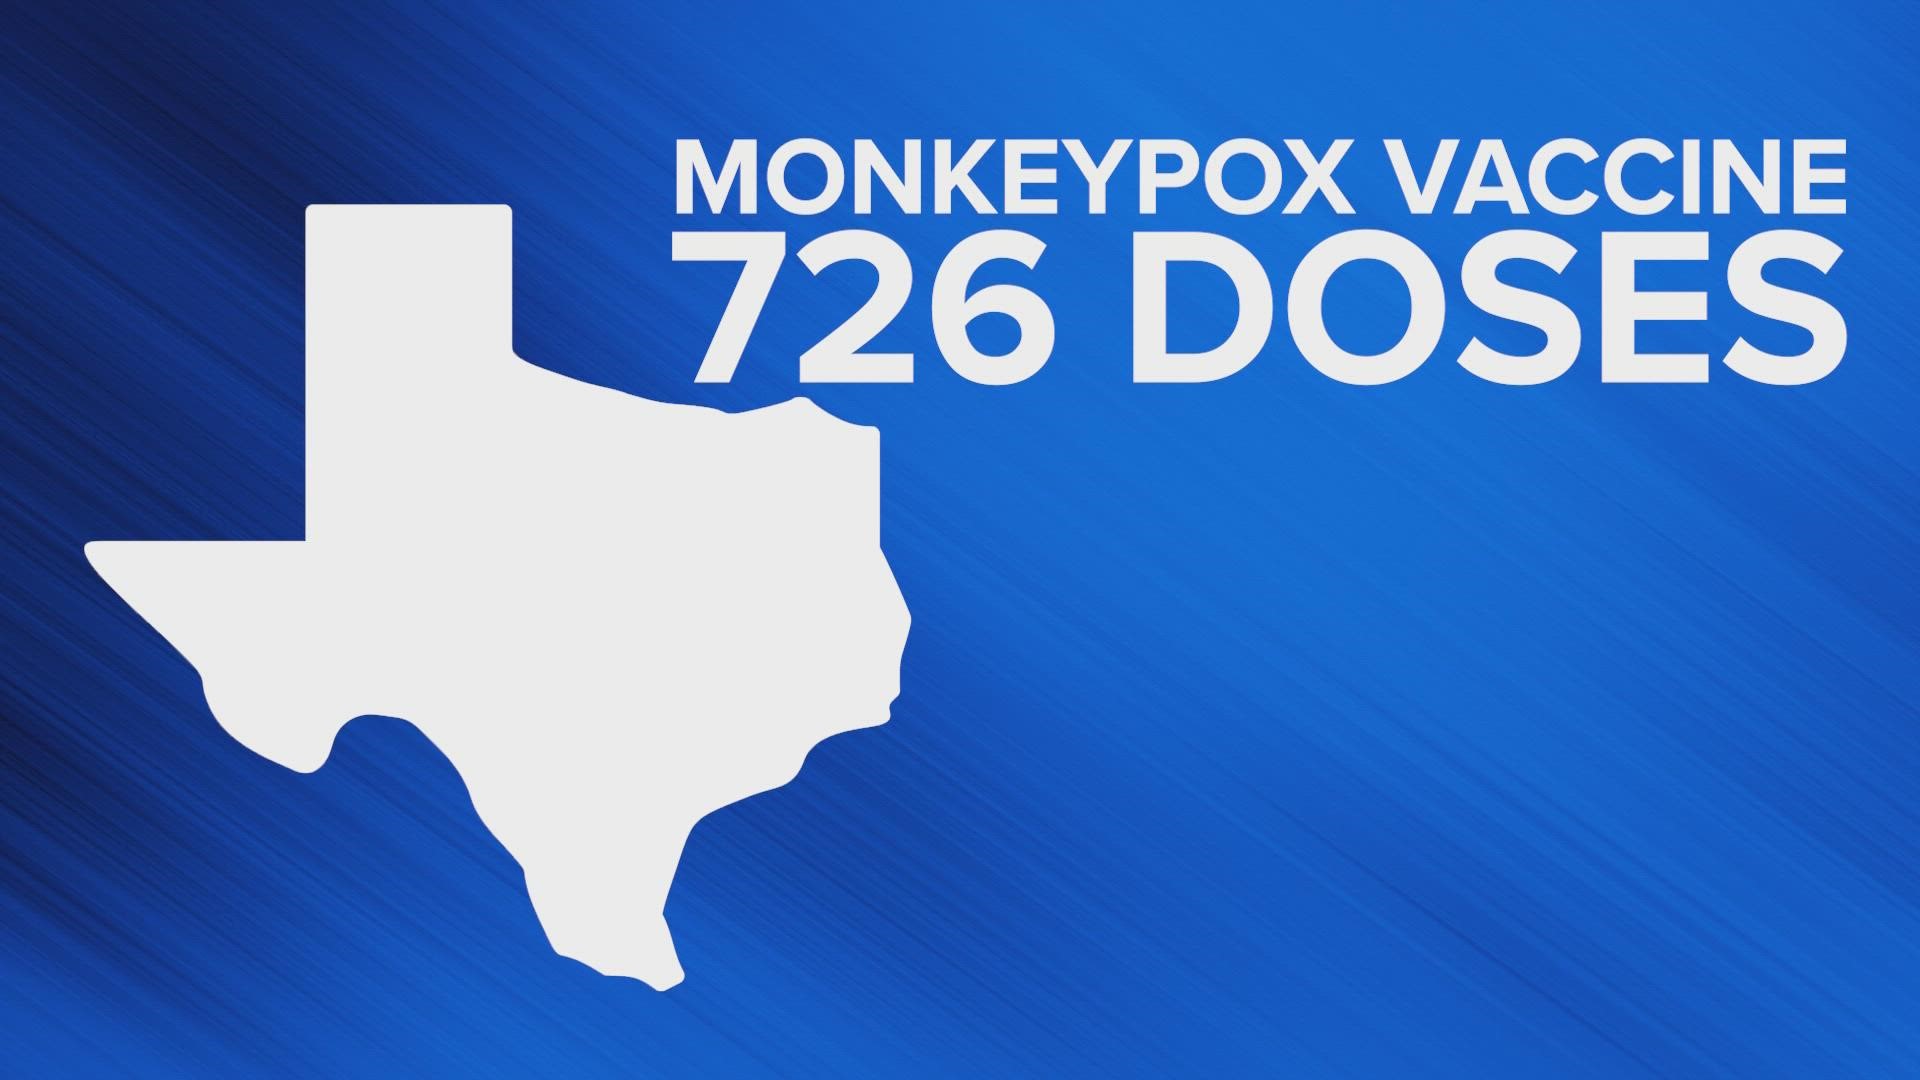 Data from the HHS shows Texas, the second largest state in the country, only has 726 doses of the FDA-approved JYNNEOS monkeypox vaccine.